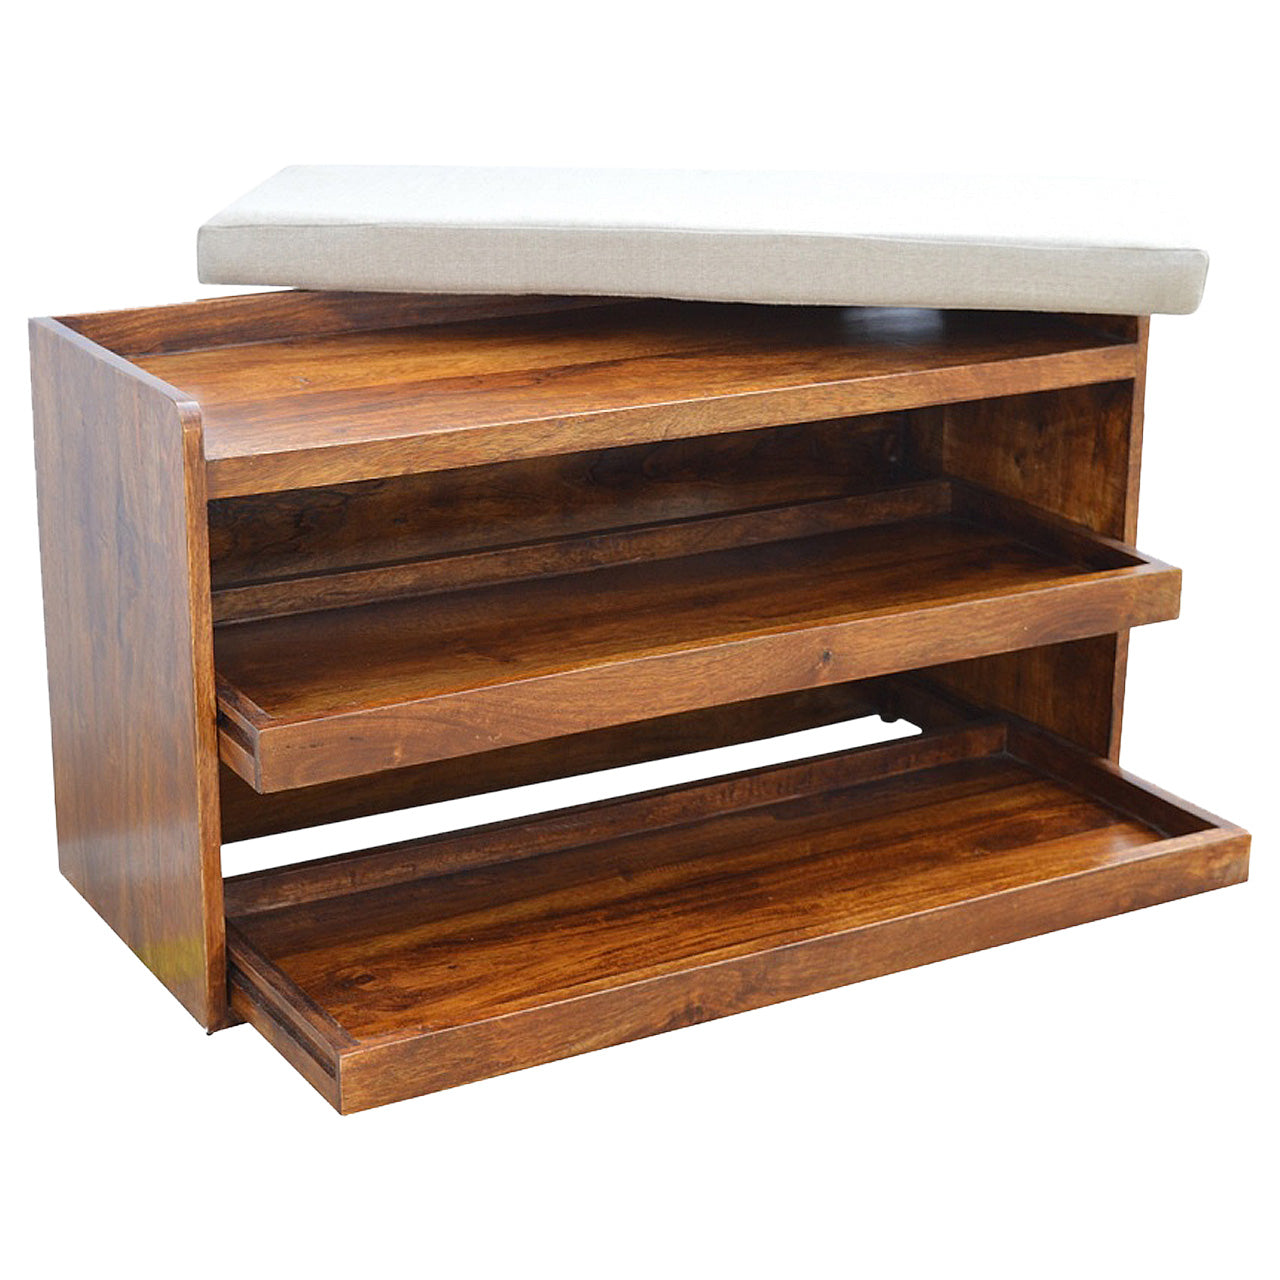 Pull Out Shelves Shoe Storage Bench With And Padded Seat In Chestnut Finish